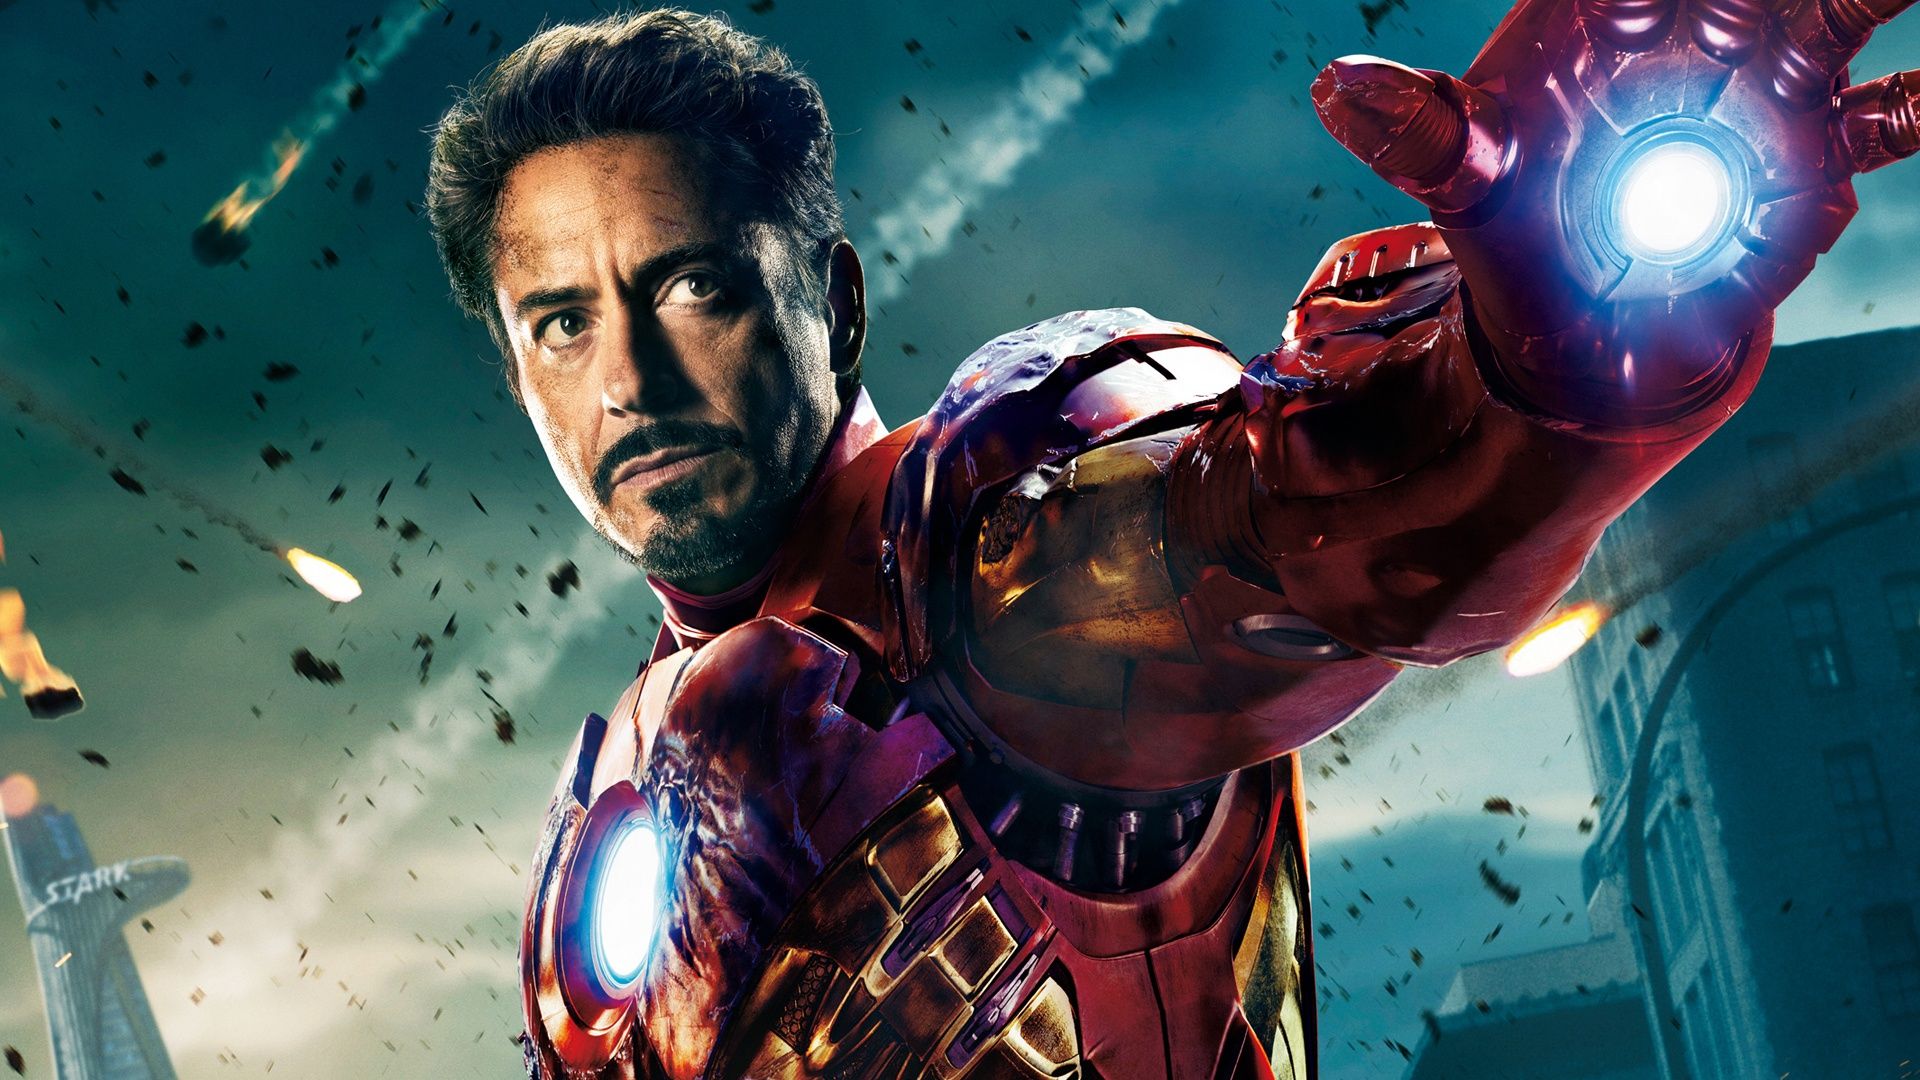 Iron Man in Avengers Movie Wallpapers | HD Wallpapers